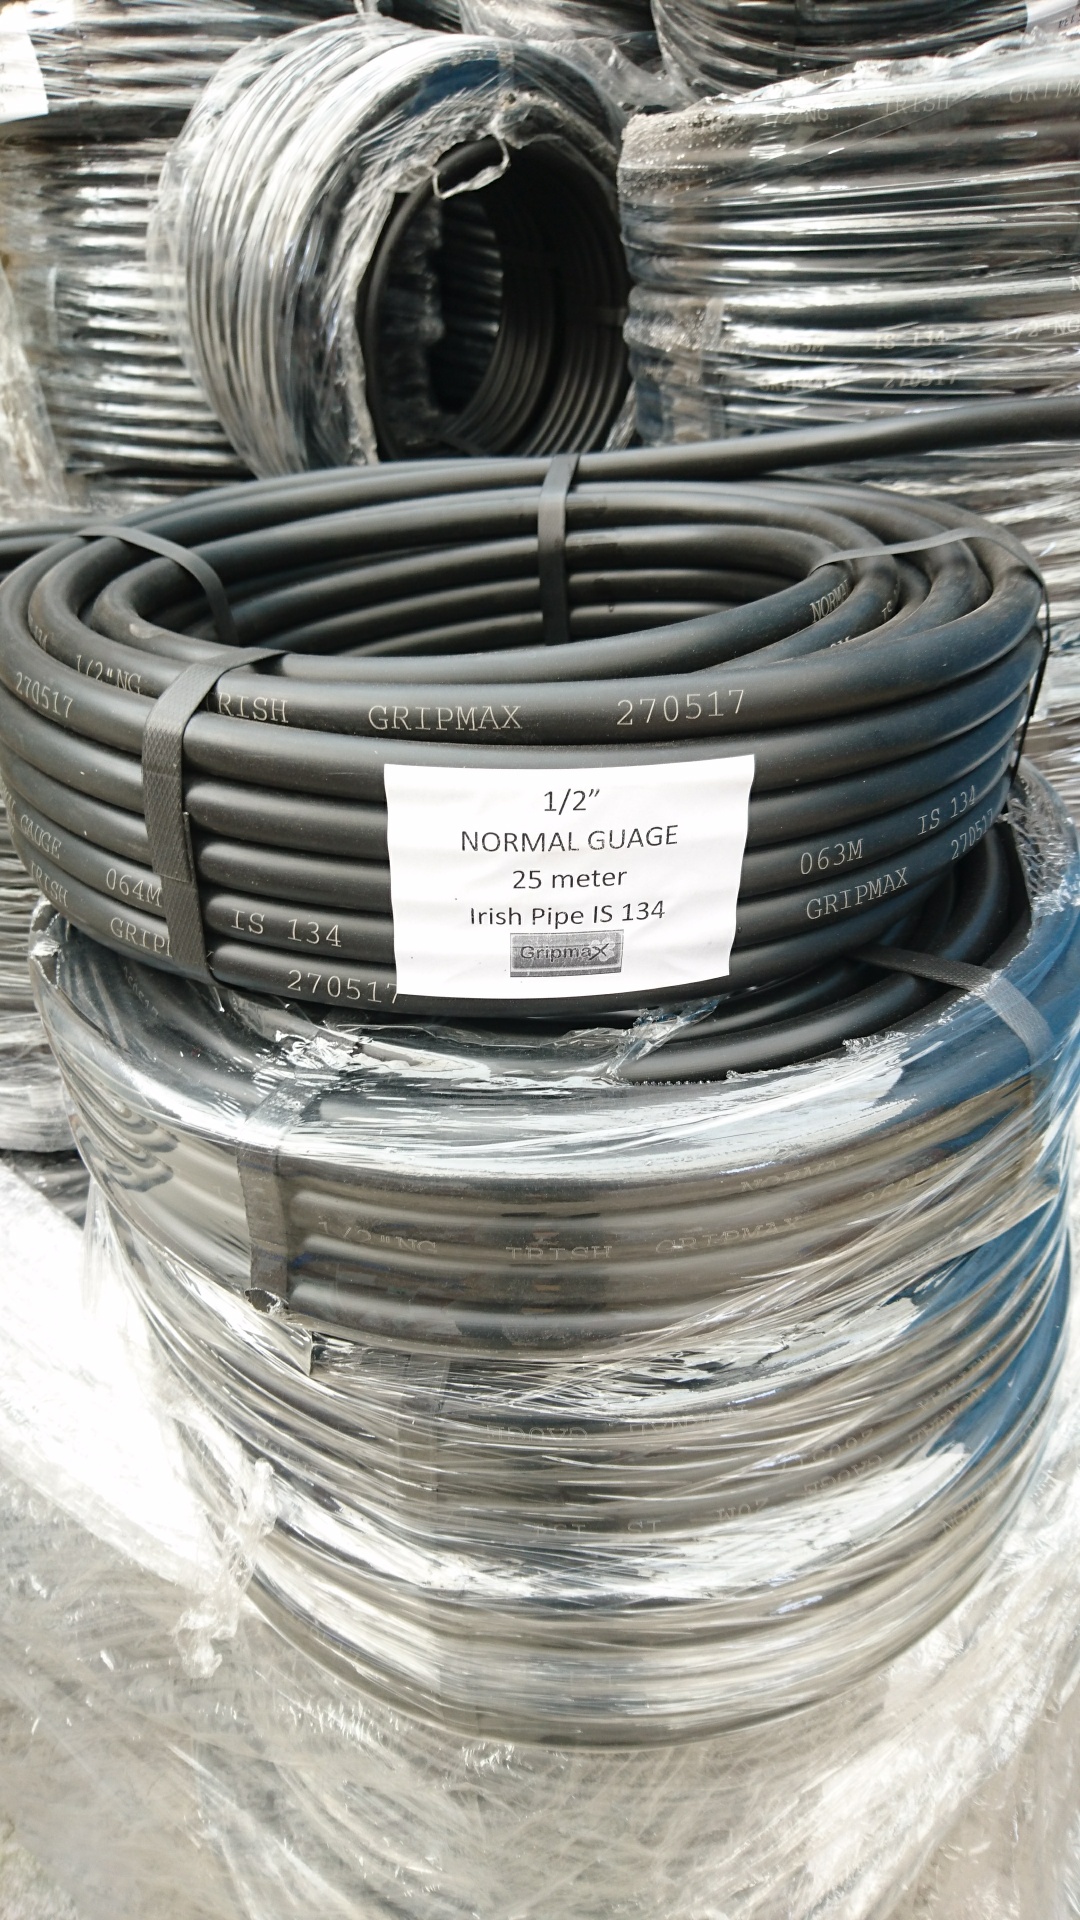 25 meter coils now available